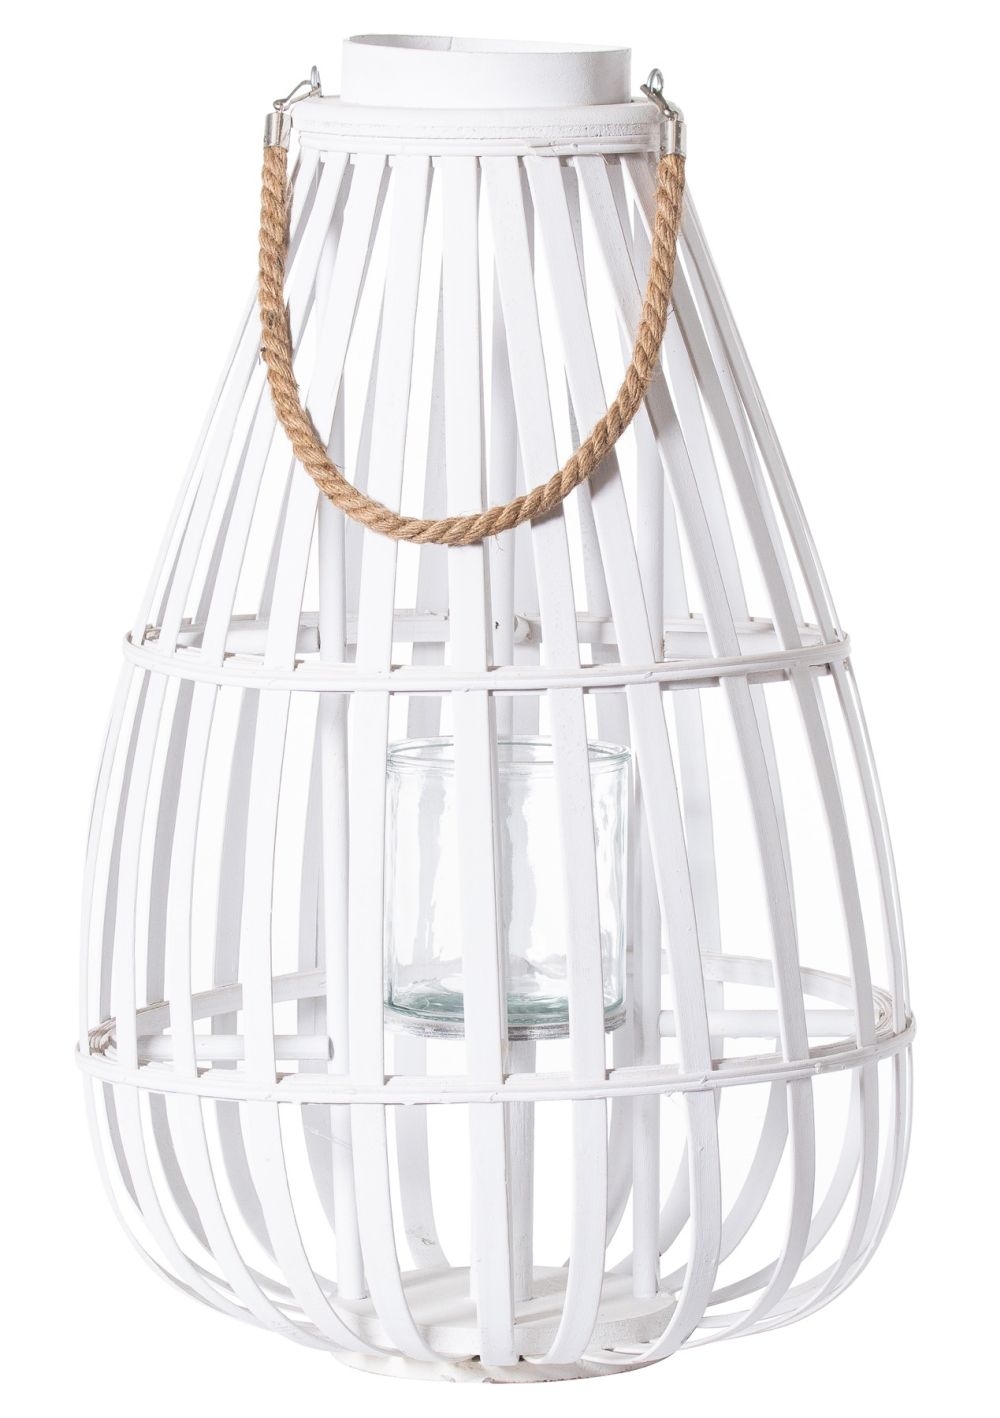 Hill Interiors White Floor Standing Domed Wicker Lantern With Rope Detail